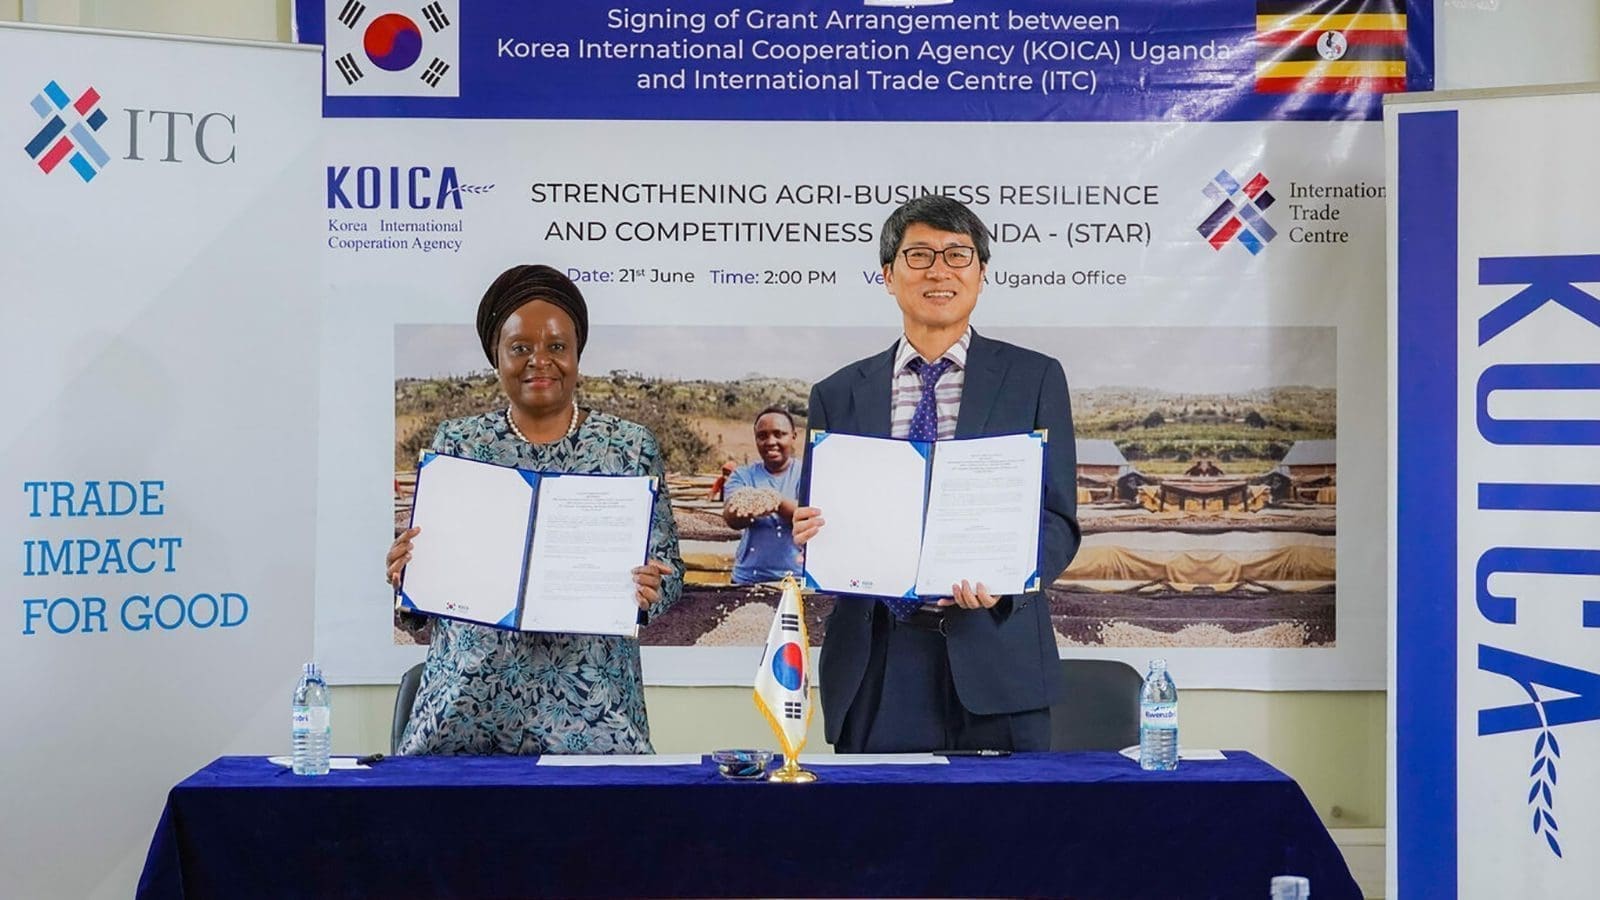 ITC supports KOICA’s sustainable farming project in Uganda with US$5m funding